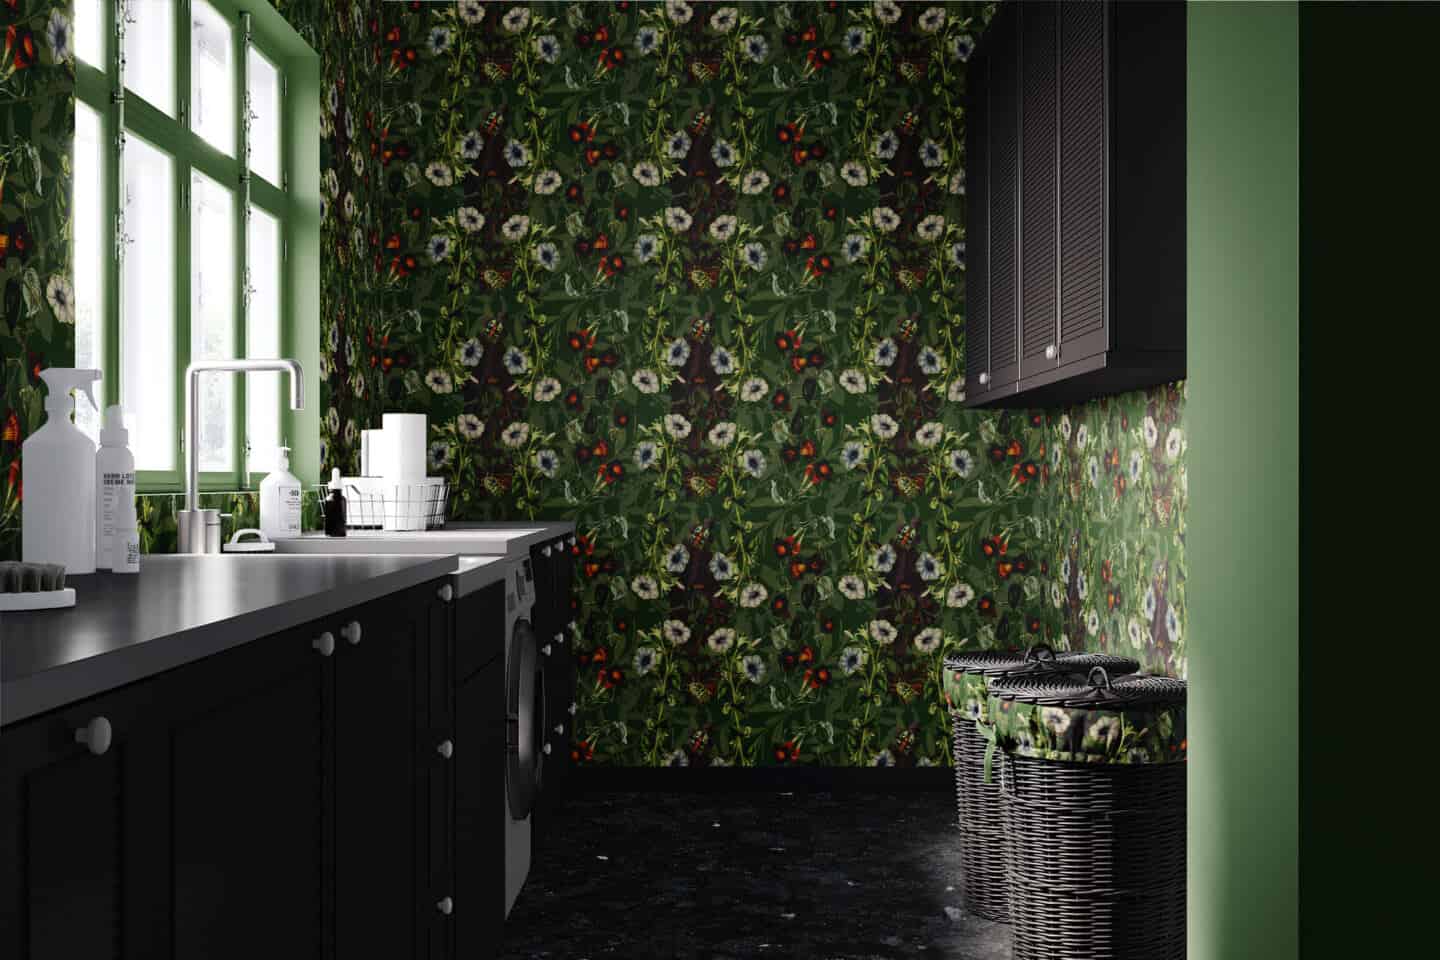 A utility room with black cabinetry and green floral wallpaper featuring bugs and butterflies.